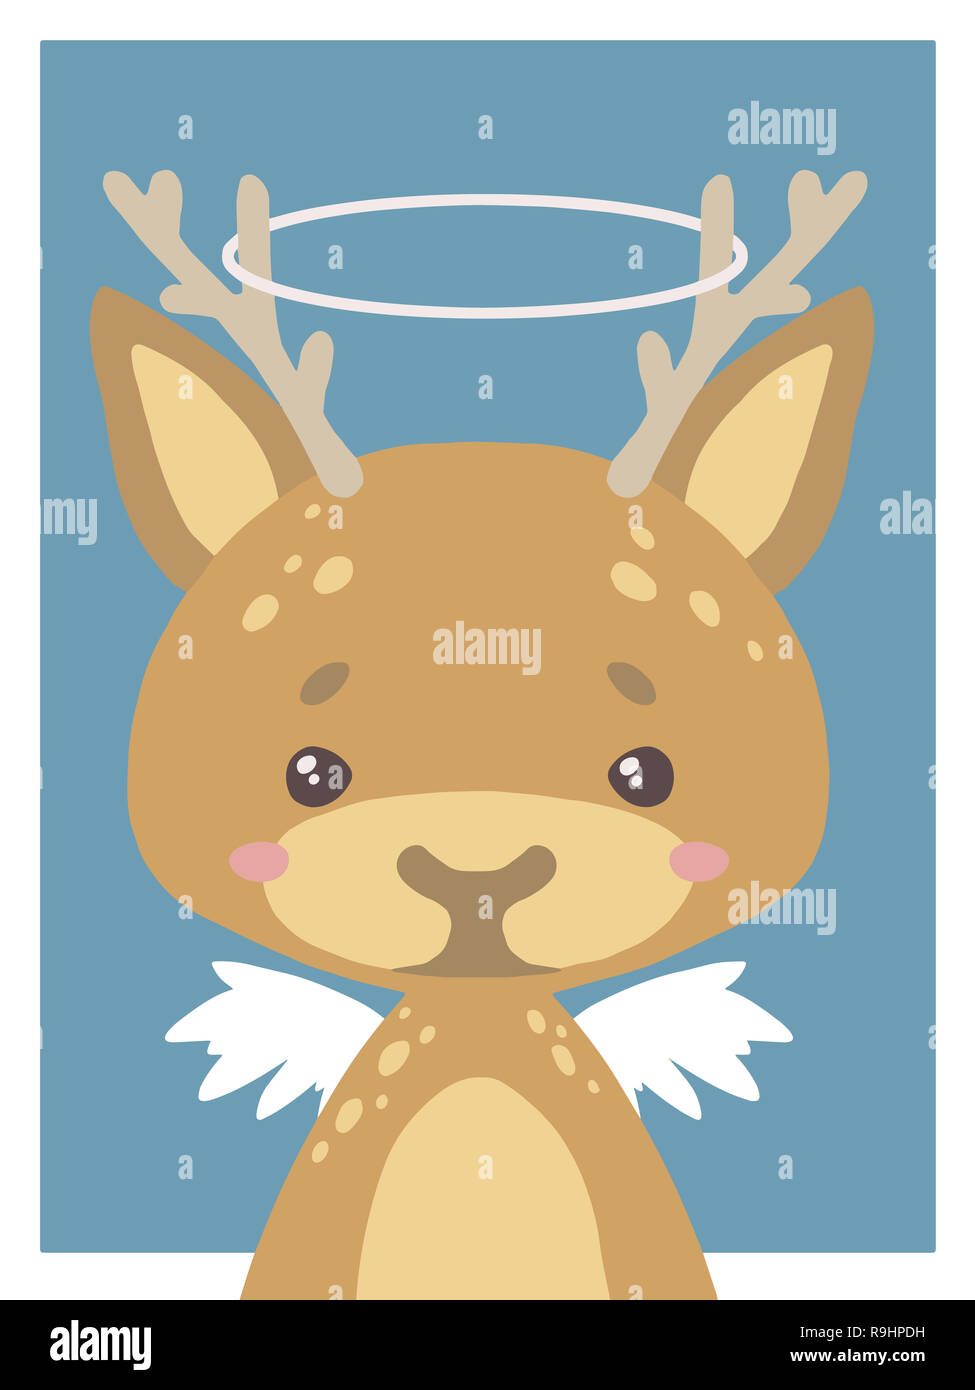 Cute cartoons style nursery animal drawing of a guardian angel deer with halo and wings Stock Photo